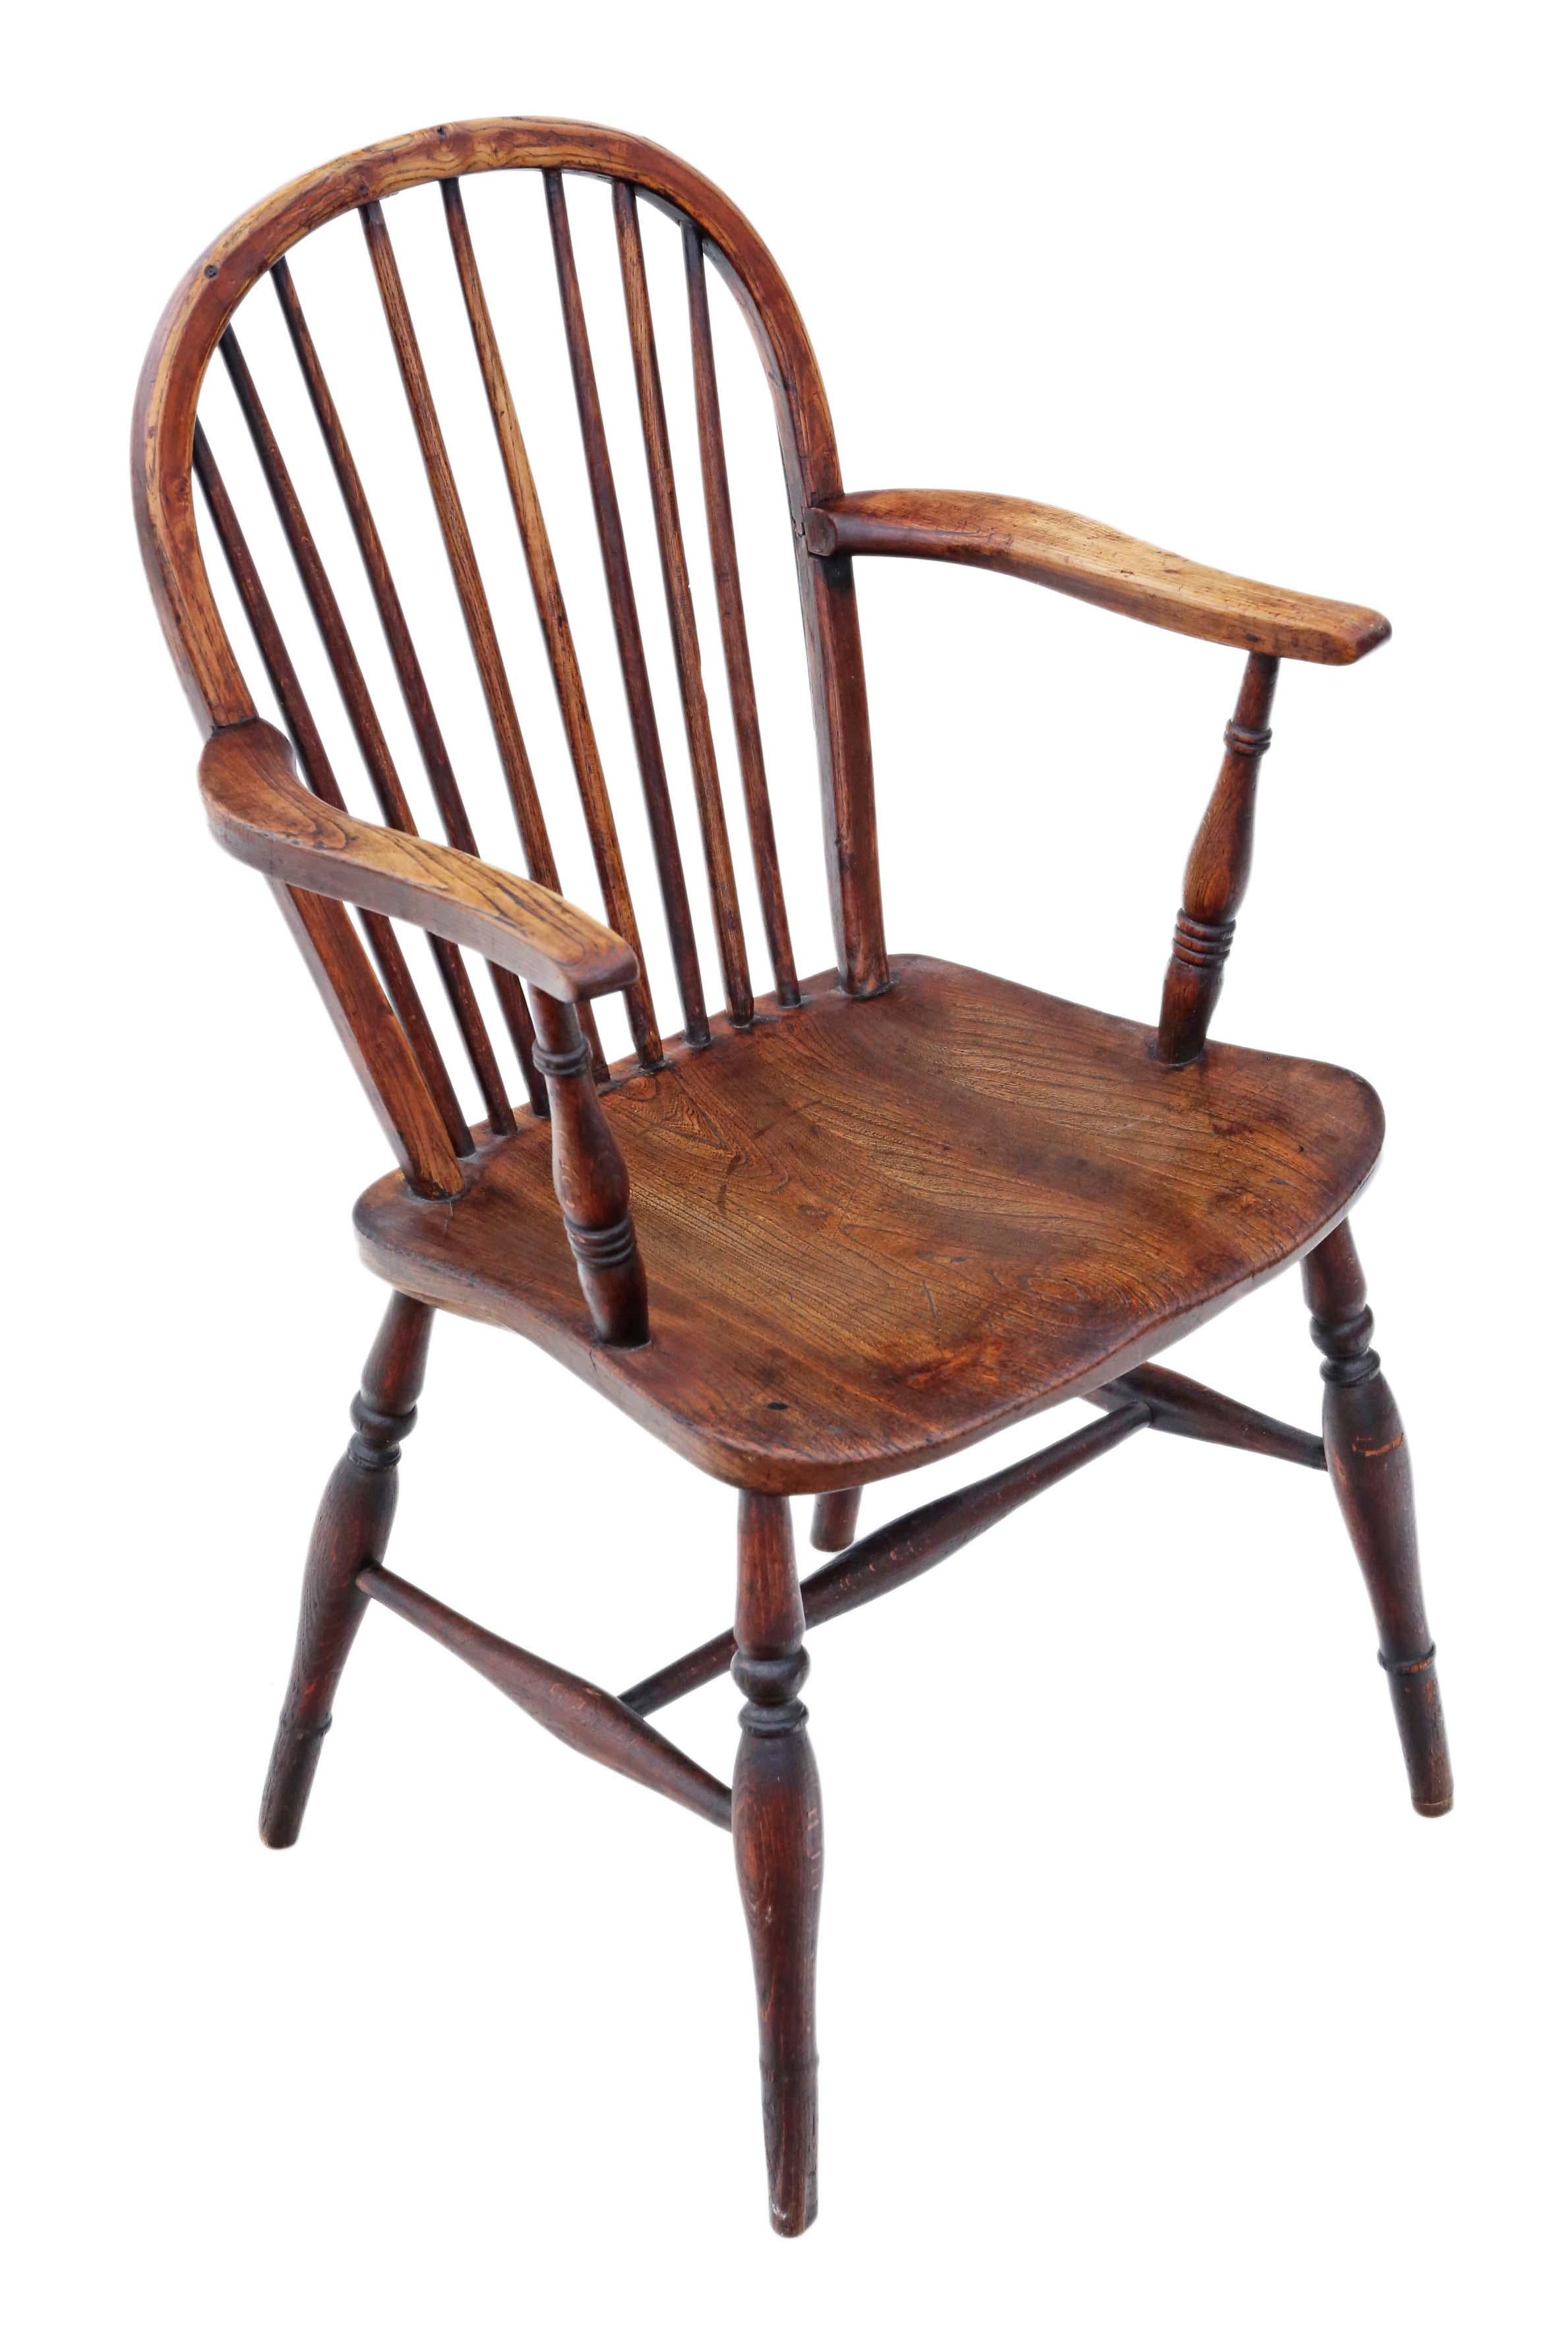 Antique Victorian 19th century mixed wood (ash, elm, yew and beech) Windsor chair dining armchair.

Solid and strong, with no loose joints and no woodworm. Full of age, character and charm. Very decorative chair with the best age and